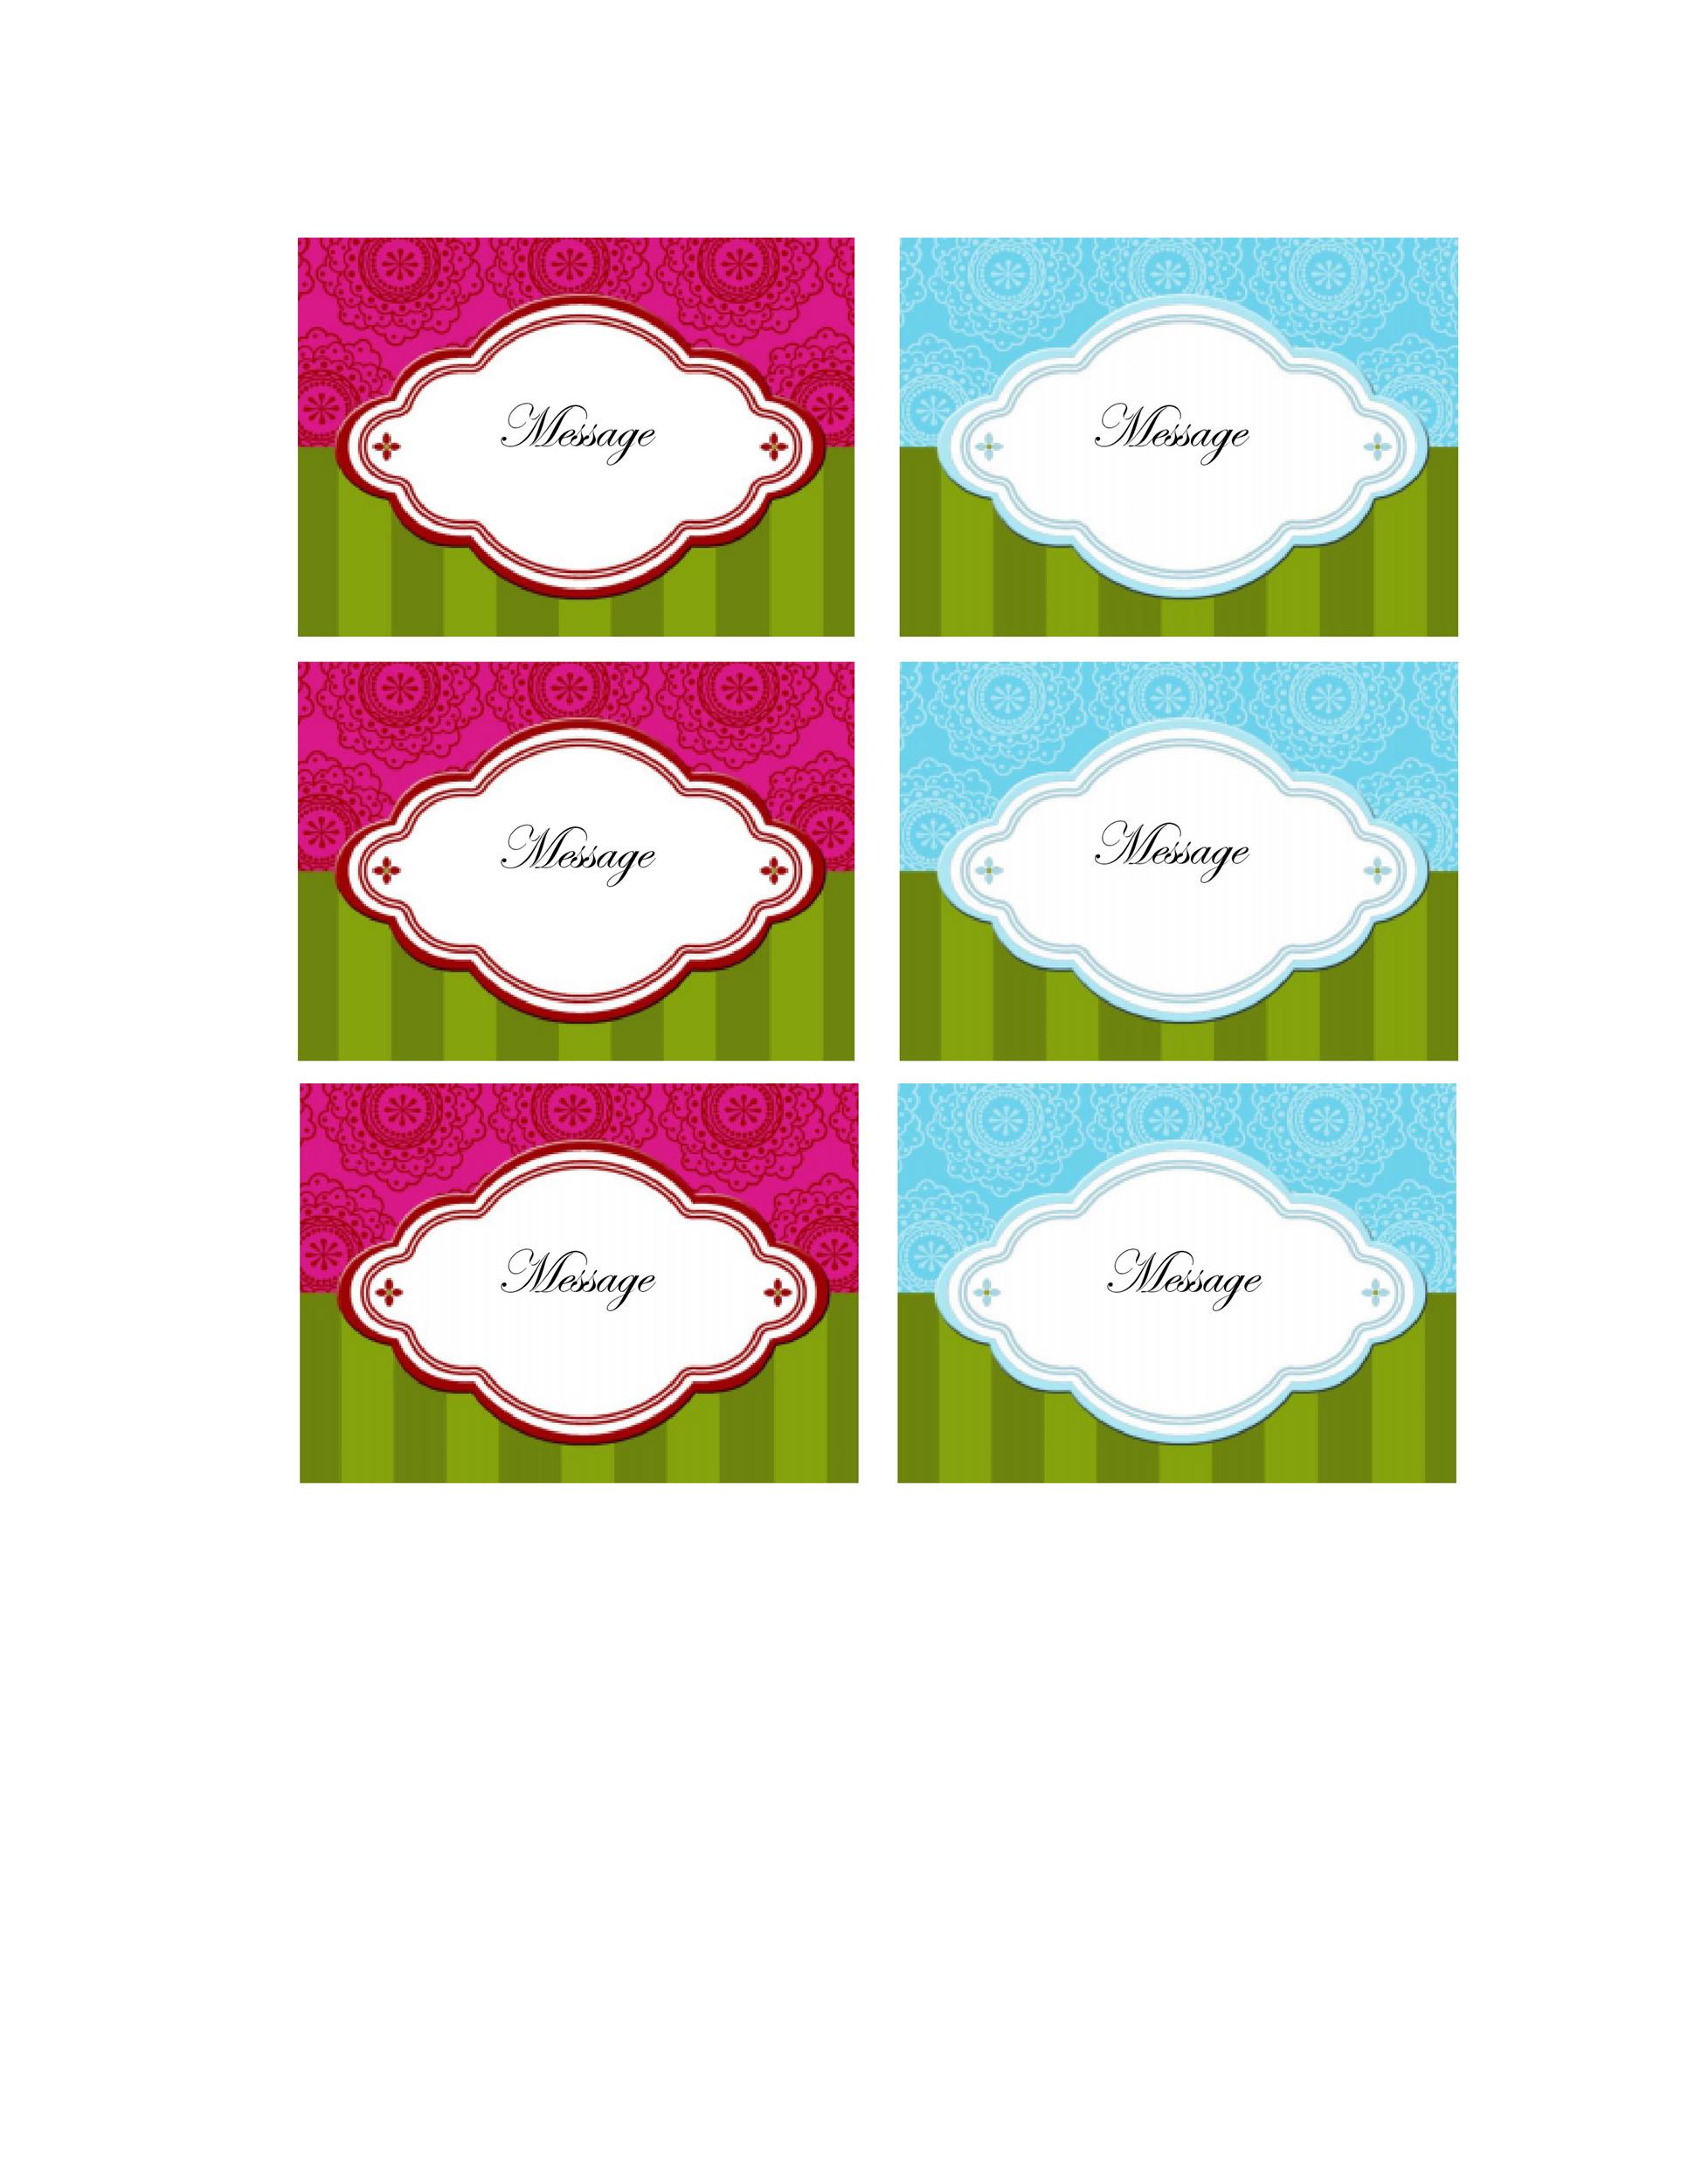 Download Gift Tag Template 37  Gift tag template printable, Gift tag  template, Tag template free